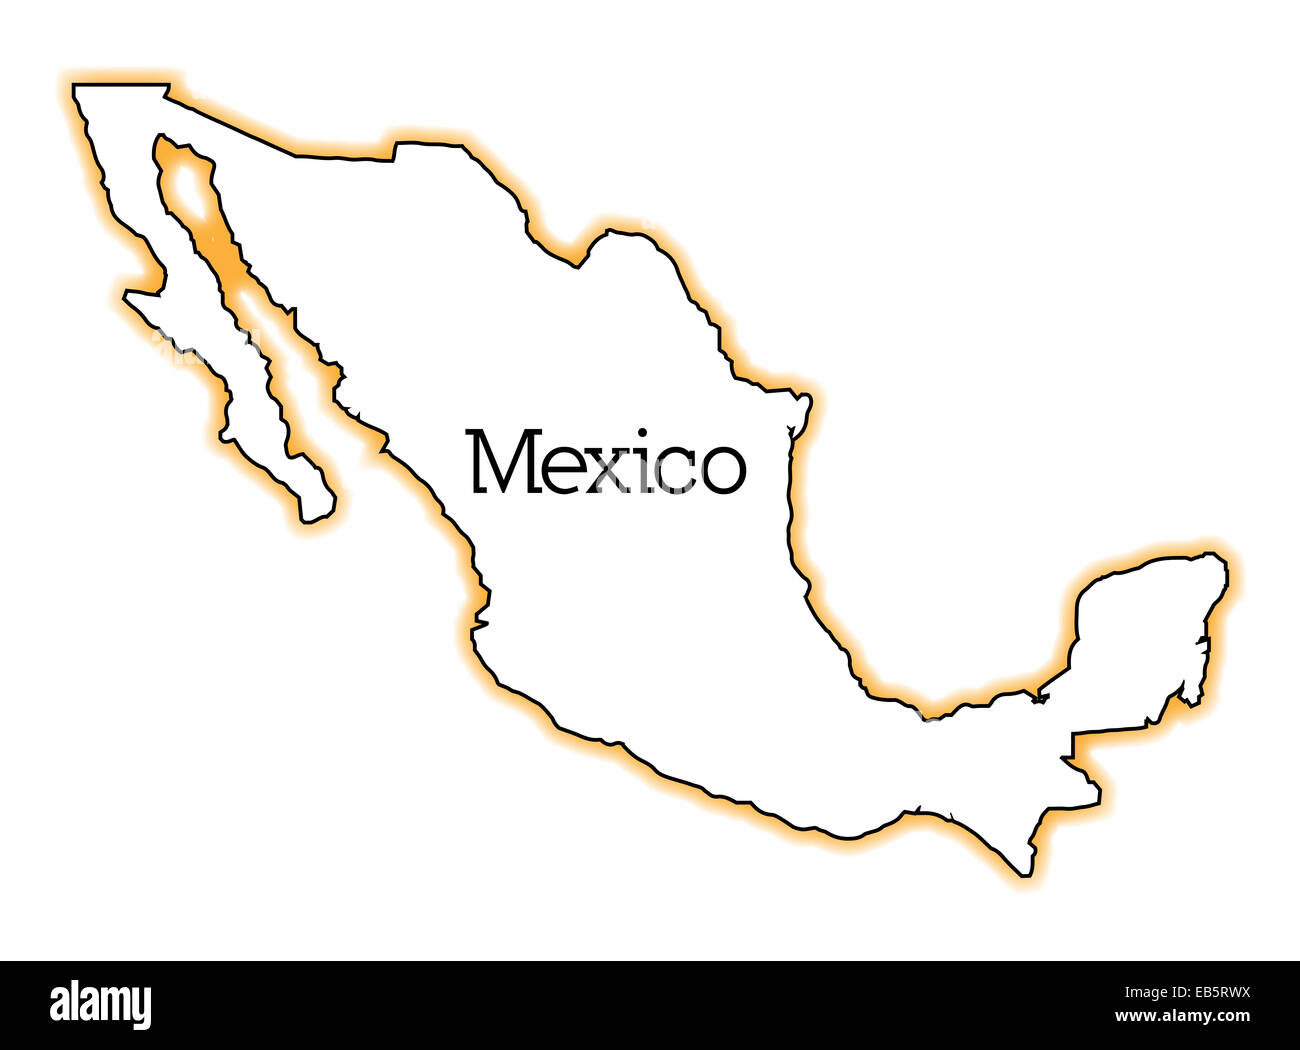 outline-map-of-mexico-over-a-white-background-stock-photo-alamy